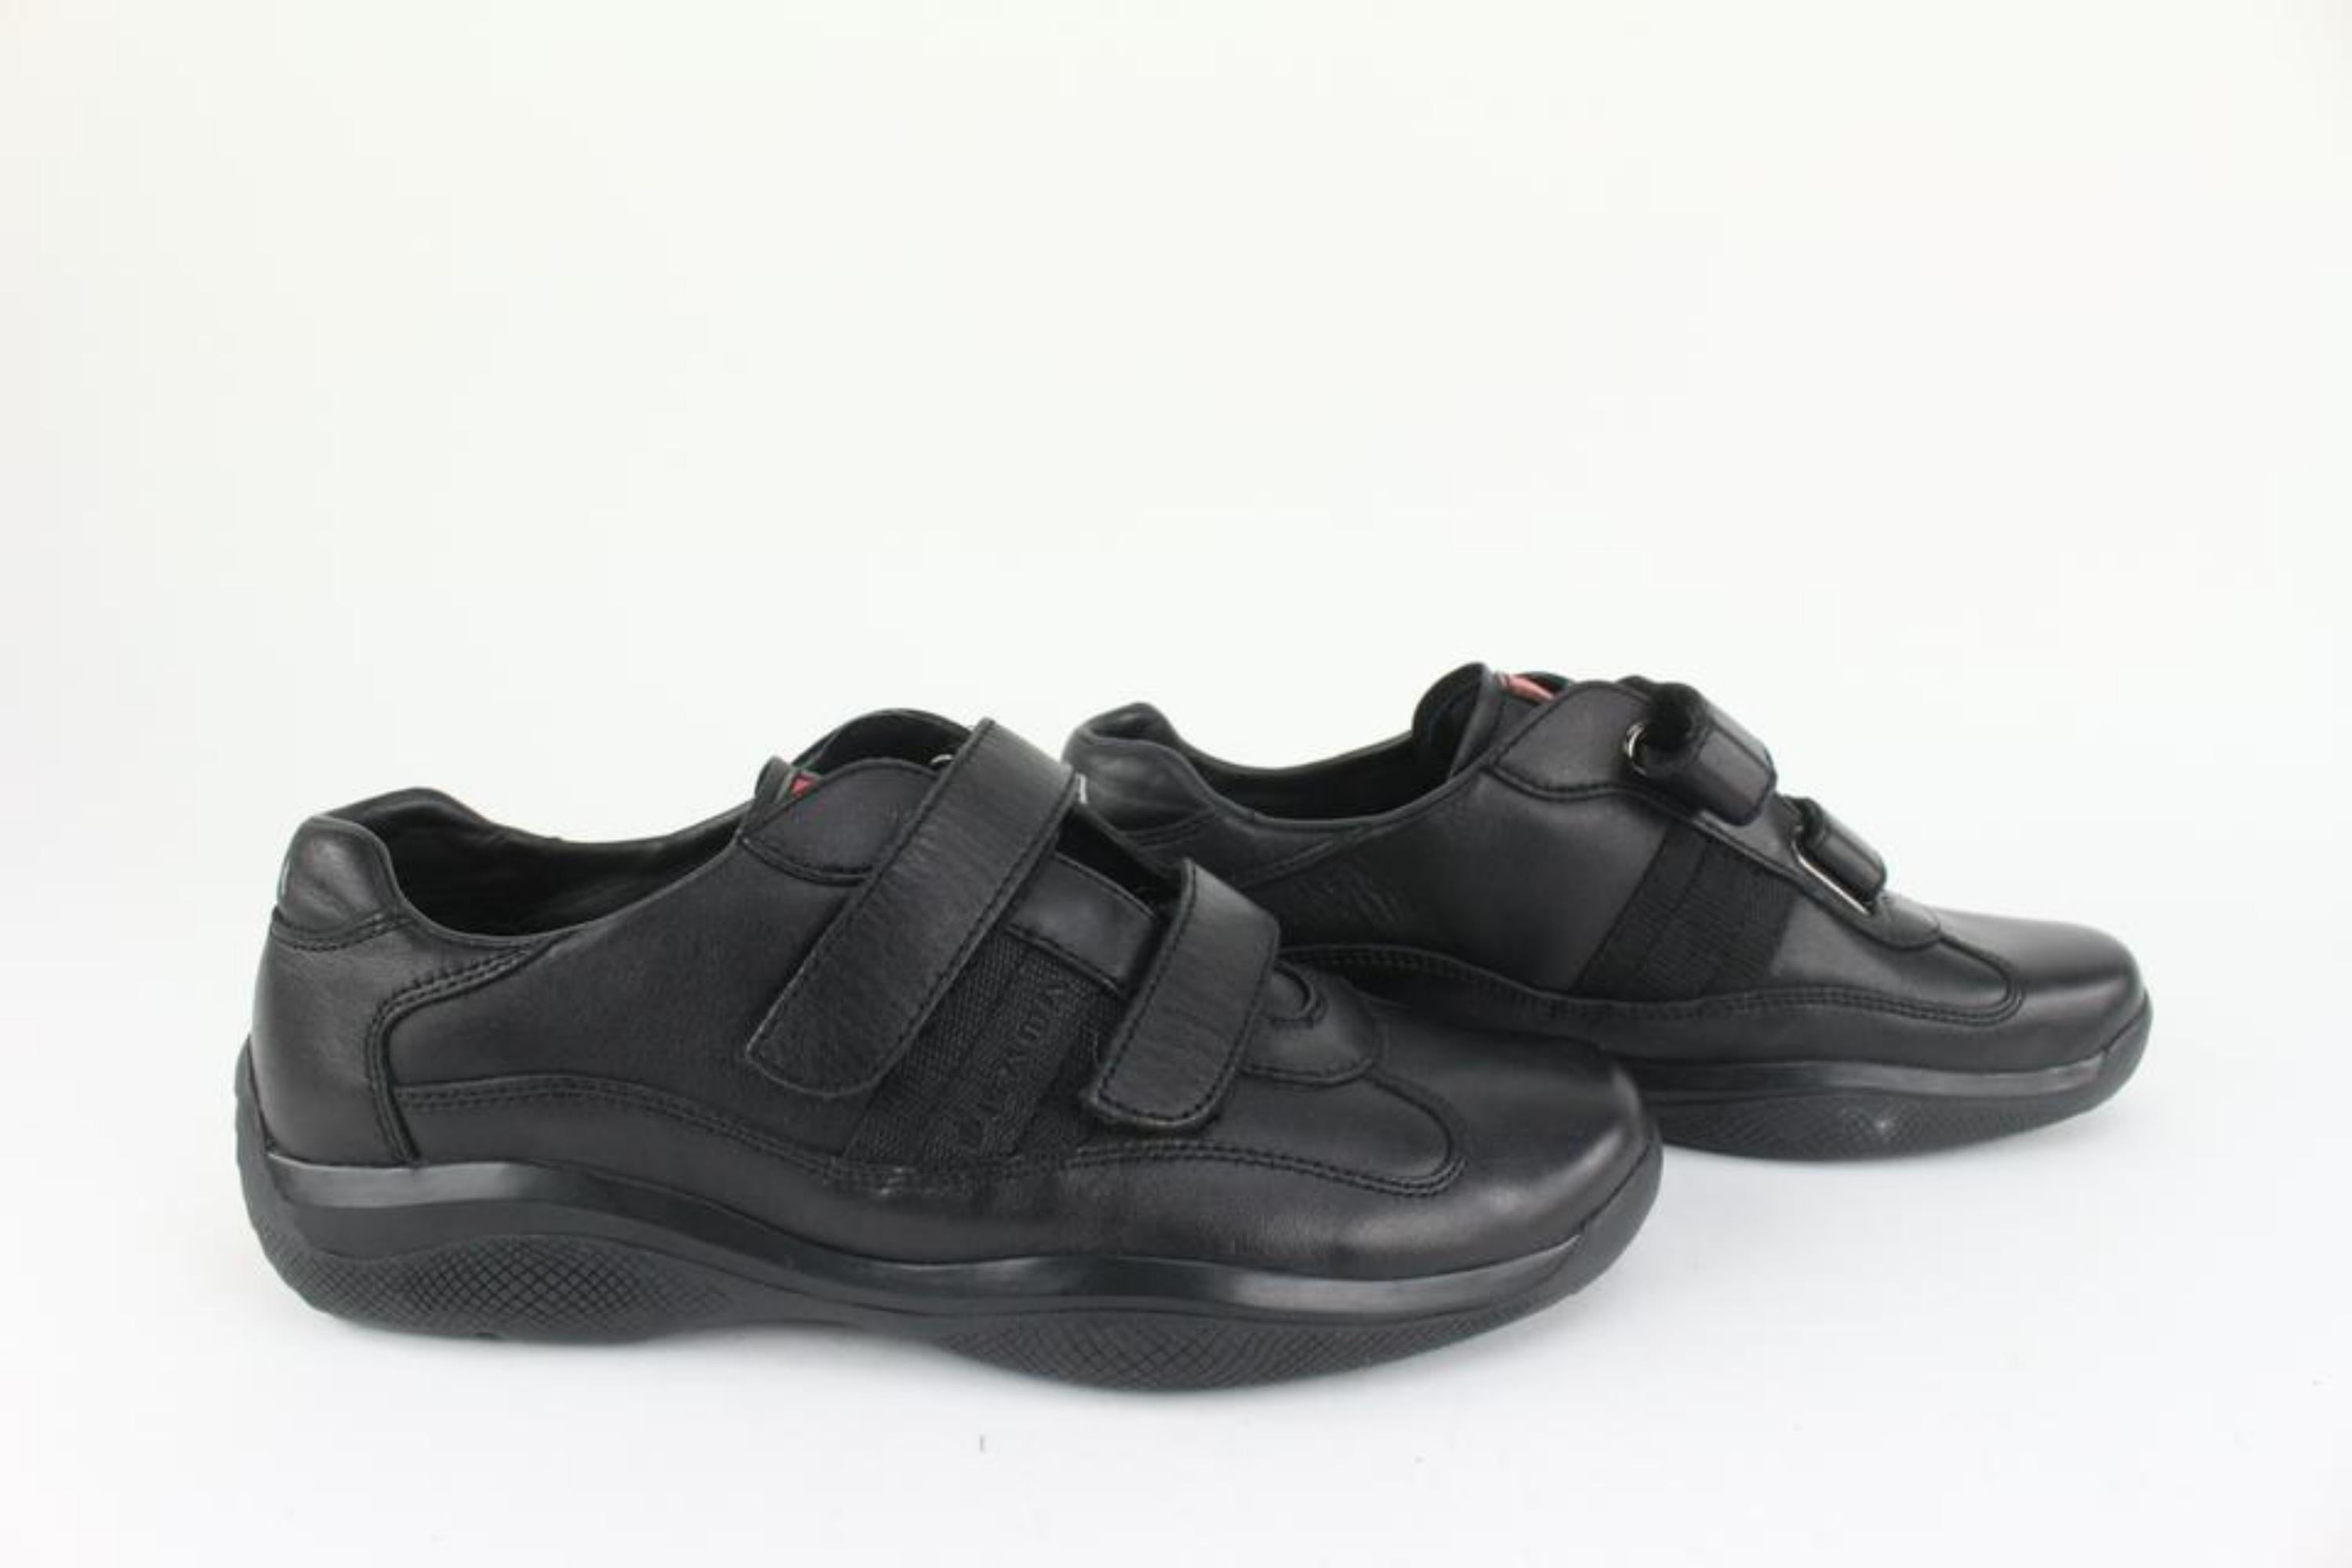 Prada Women's 7.5 US Black Velcro Low Top Sneaker 128p33 In Good Condition For Sale In Dix hills, NY